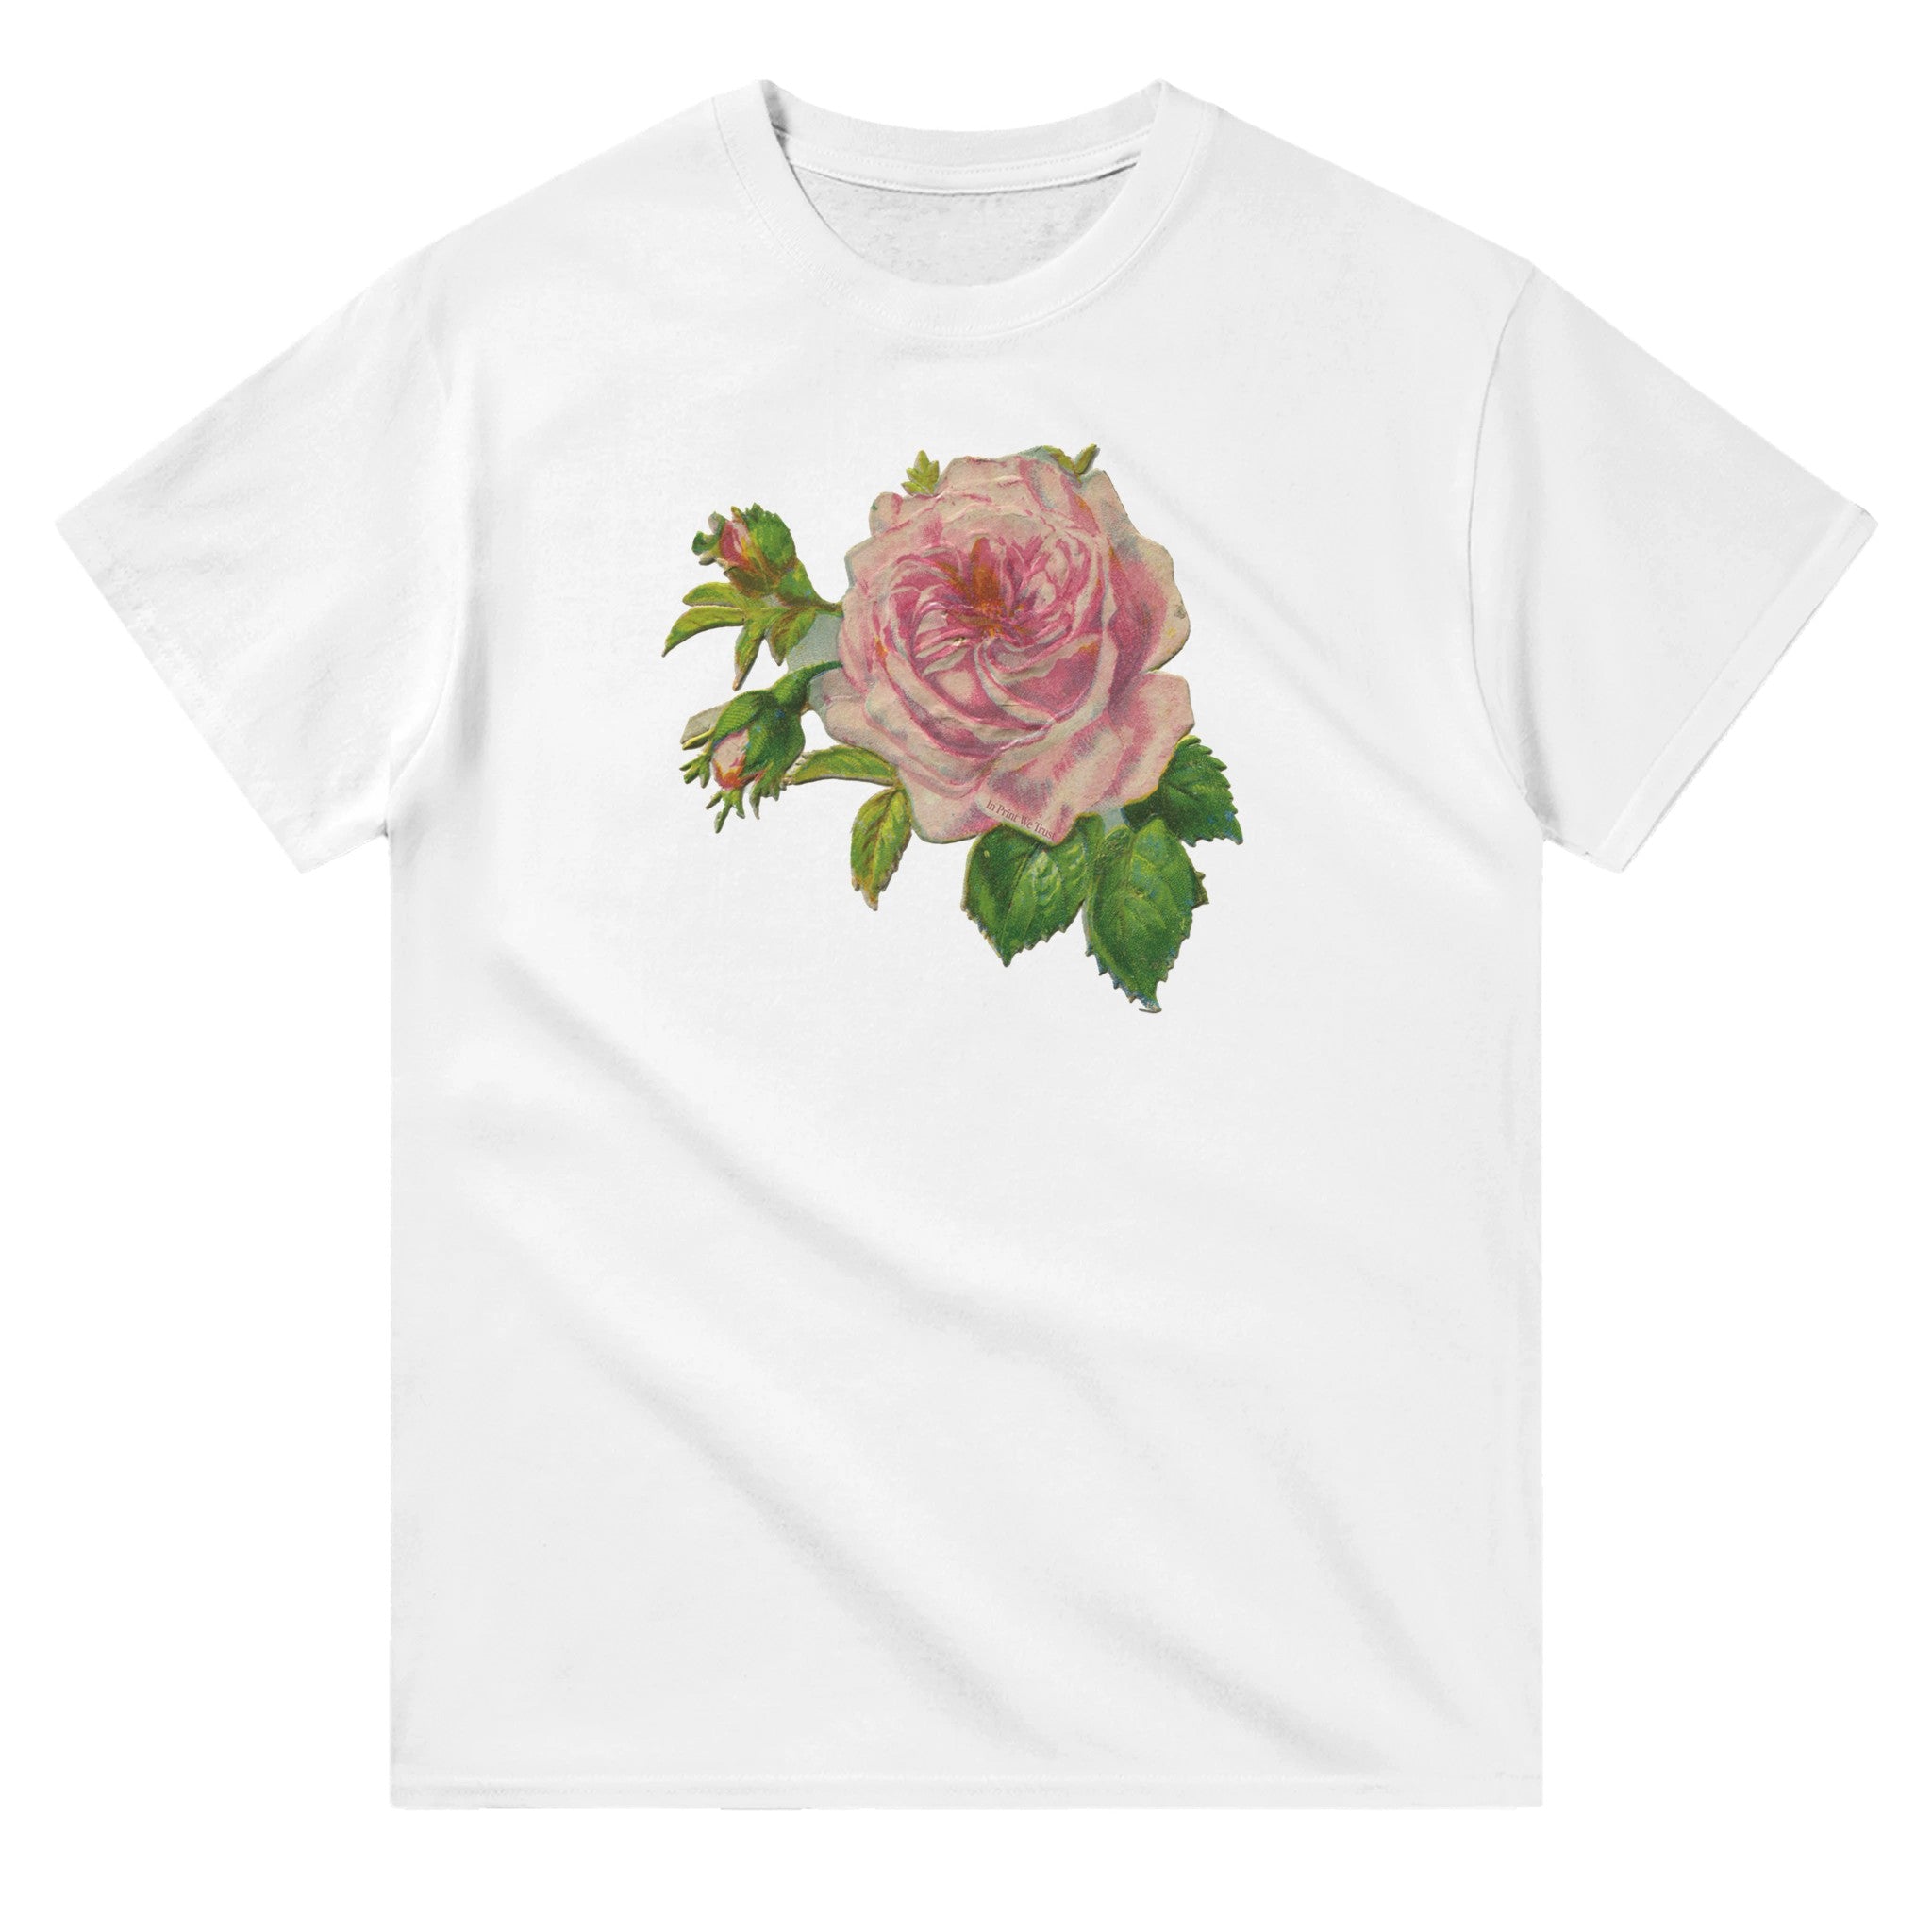 'Bed of Roses' classic tee - In Print We Trust